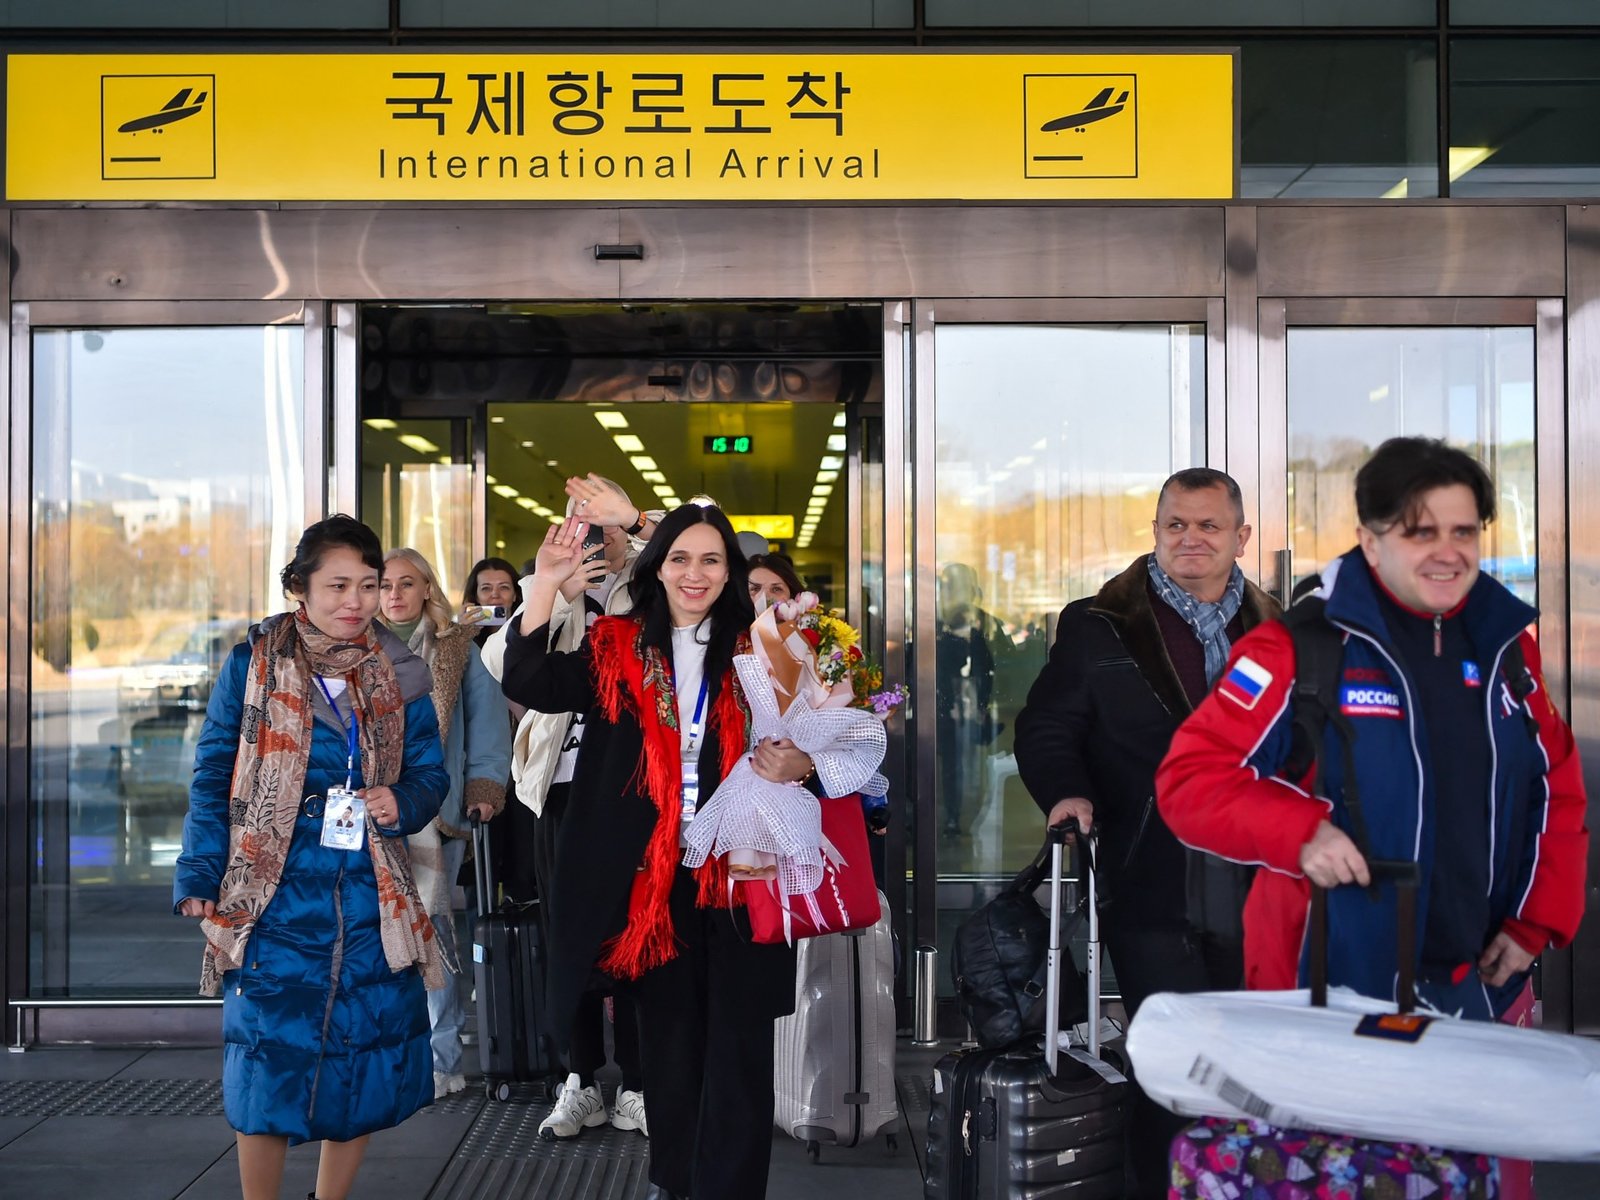 Russians arrive in North Korea as first foreign tour group since COVID 19 | Tourism News